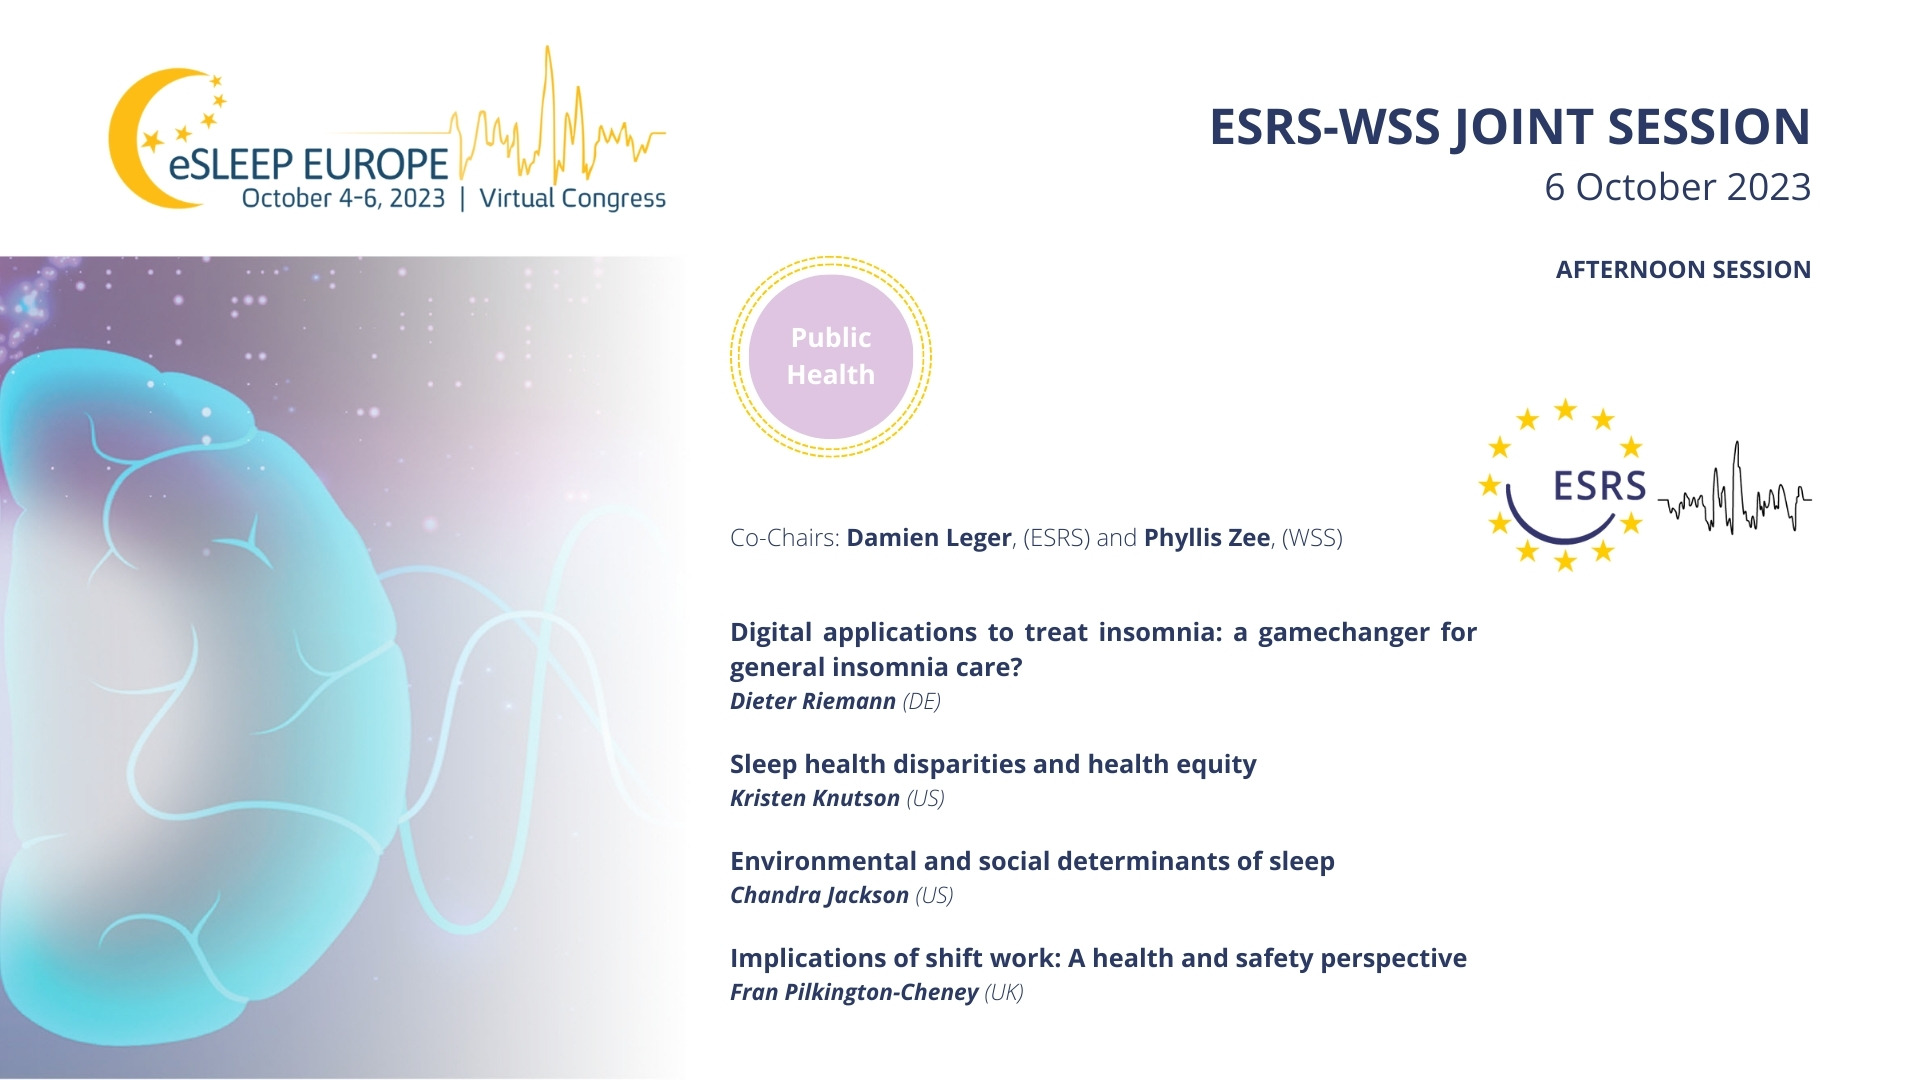 SSF-21-Jul.-eSleep-Europe-2023-3rd-day-ESRS-WSS-Joint-Session